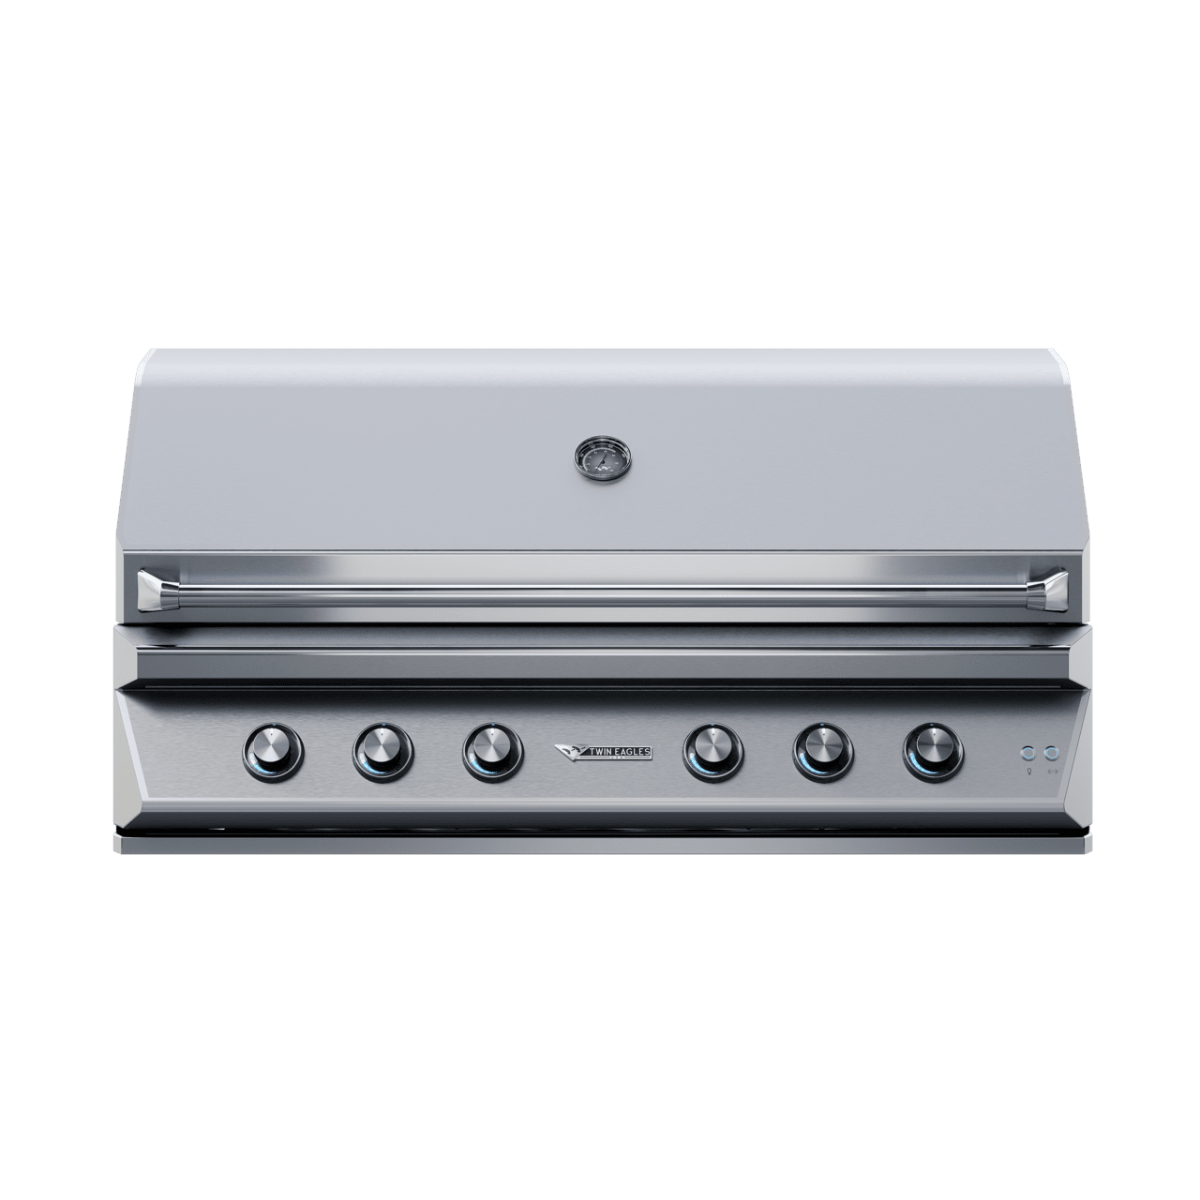 Front view of a 54-inch Twin Eagles gas grill with a closed lid. The stainless steel grill features five control knobs and a temperature gauge on the lid, along with an infrared rotisserie and sear zone.